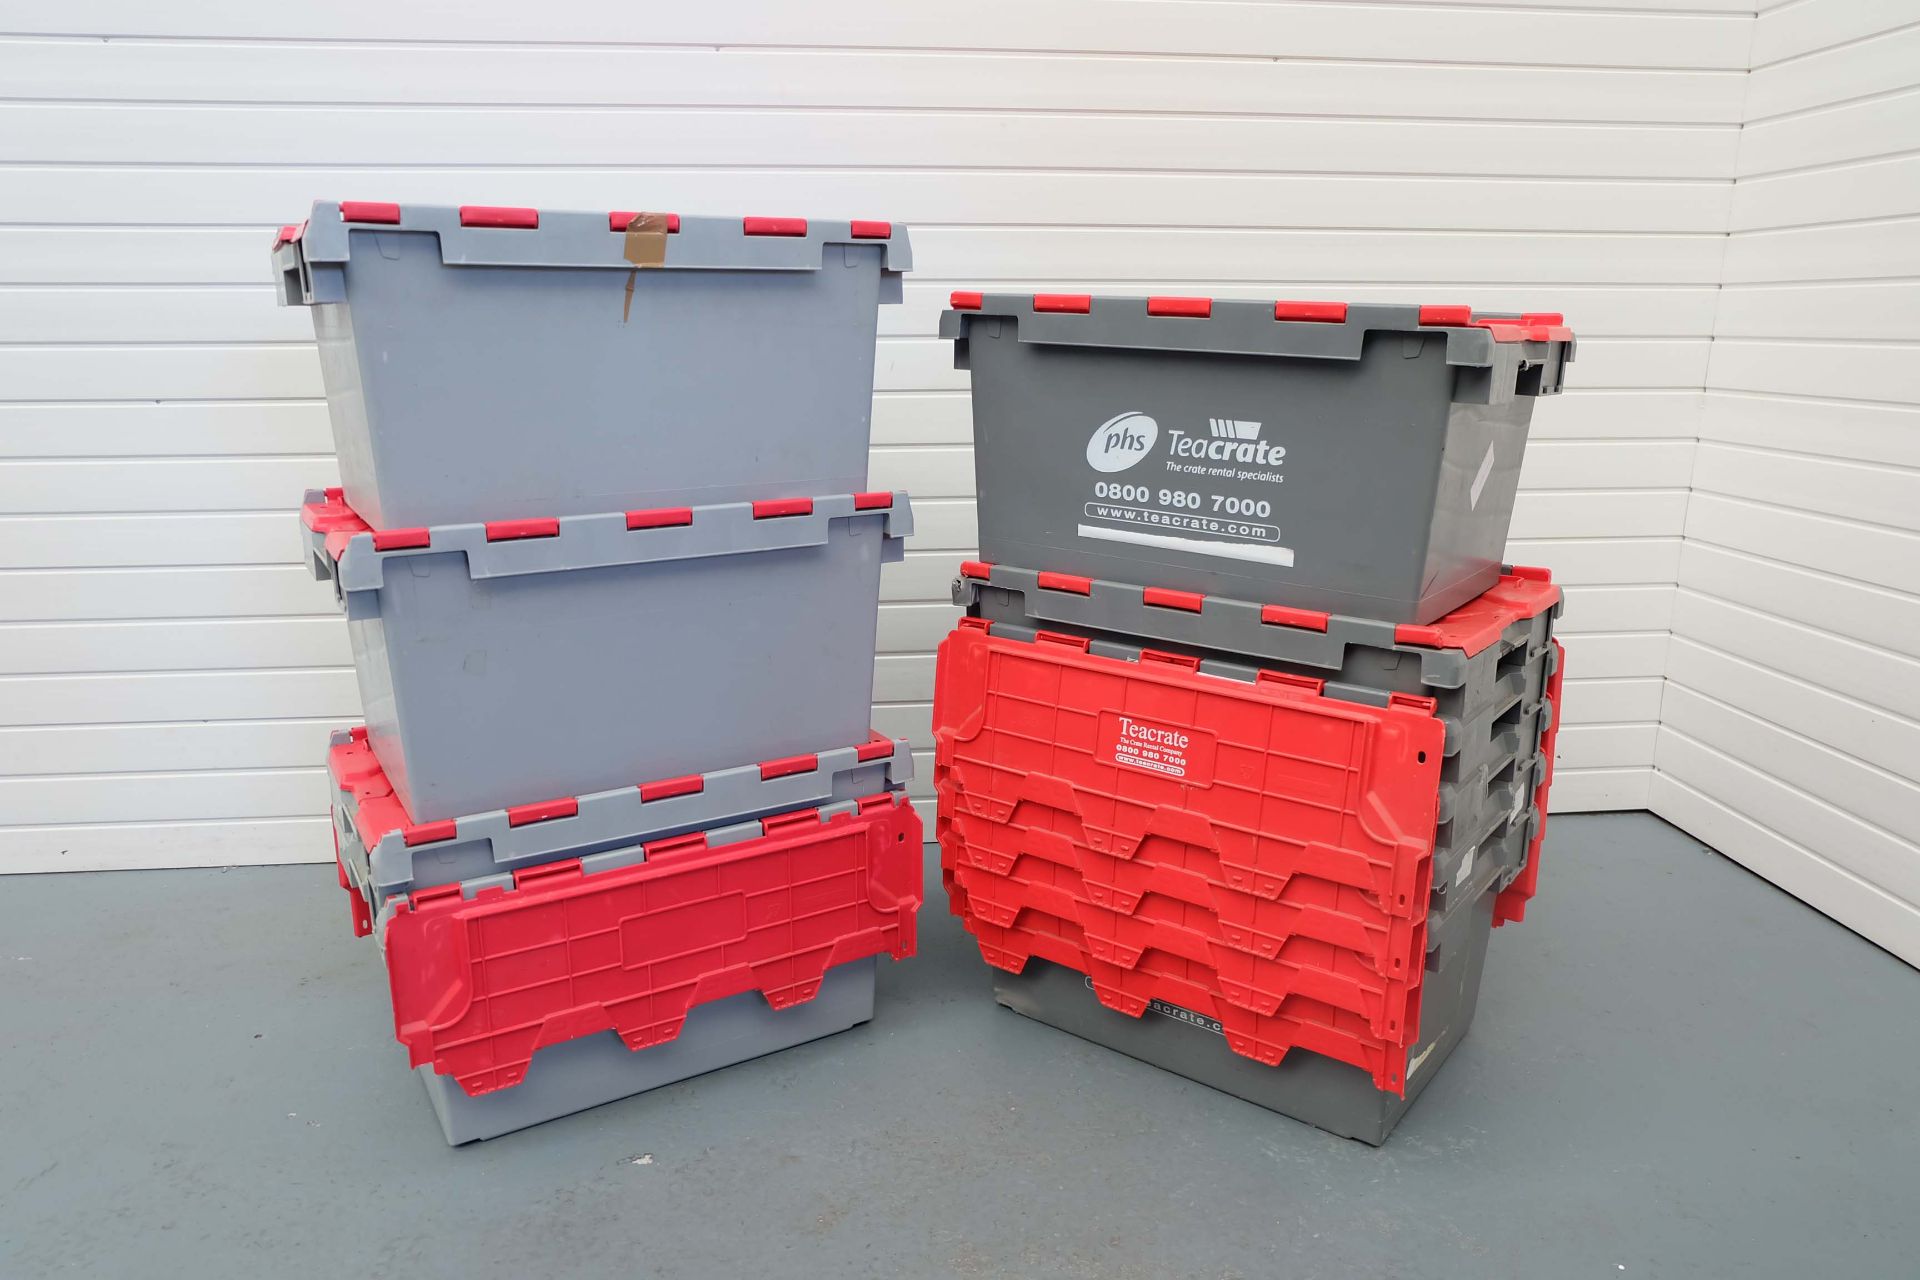 10 x PHS Teacrate. Type LC3B Standard Lidded Crate. Volume 80 Litres.